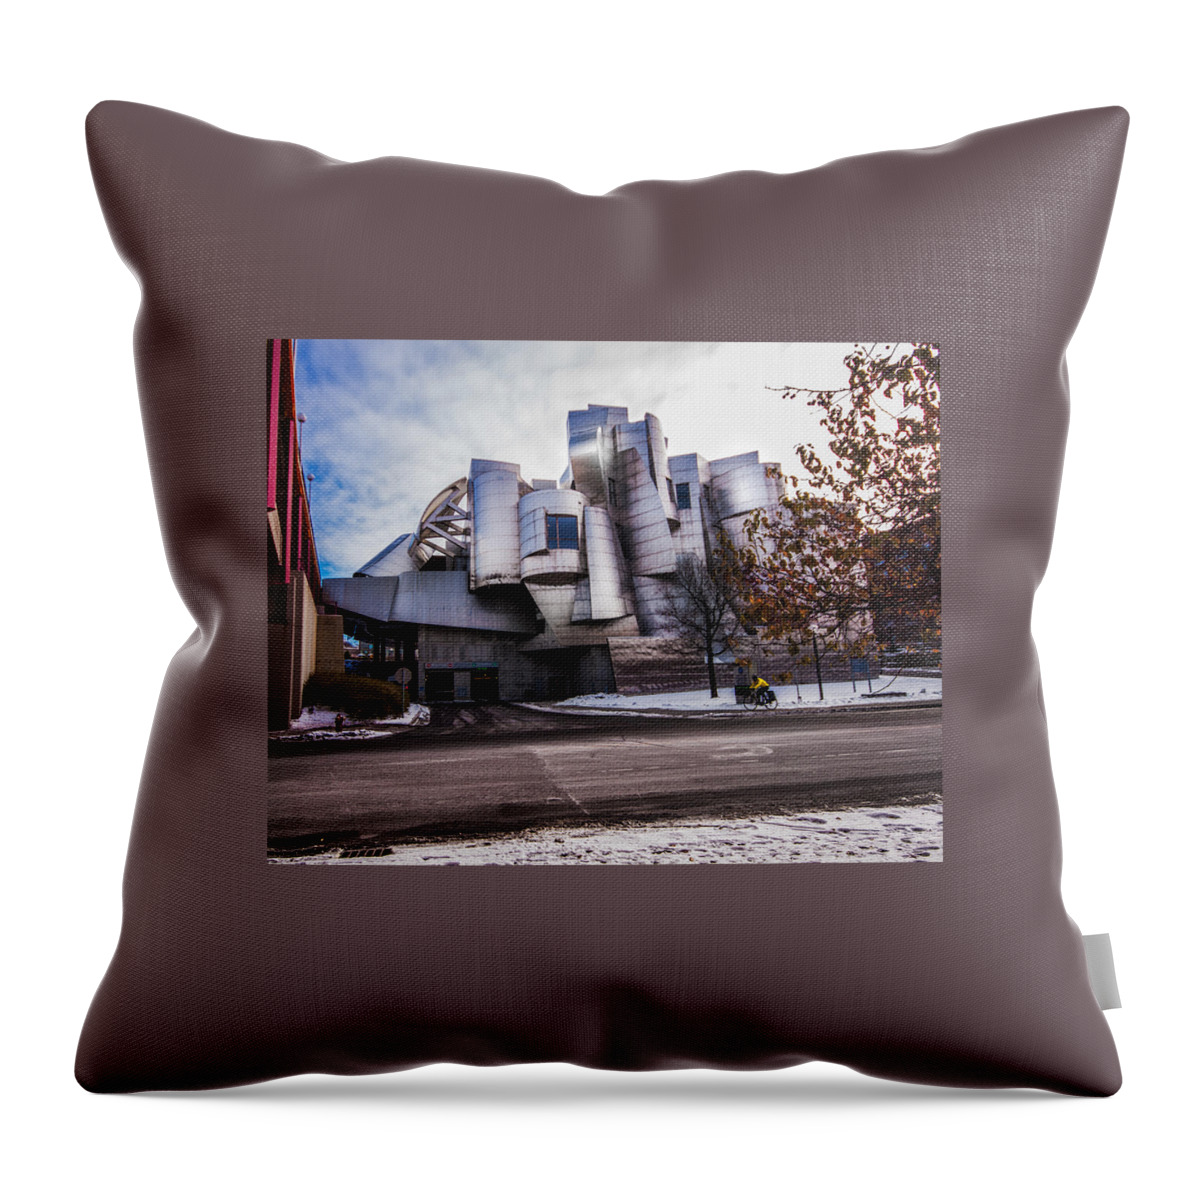 Architect Throw Pillow featuring the photograph The Weisman Art Museum by Tom Gort